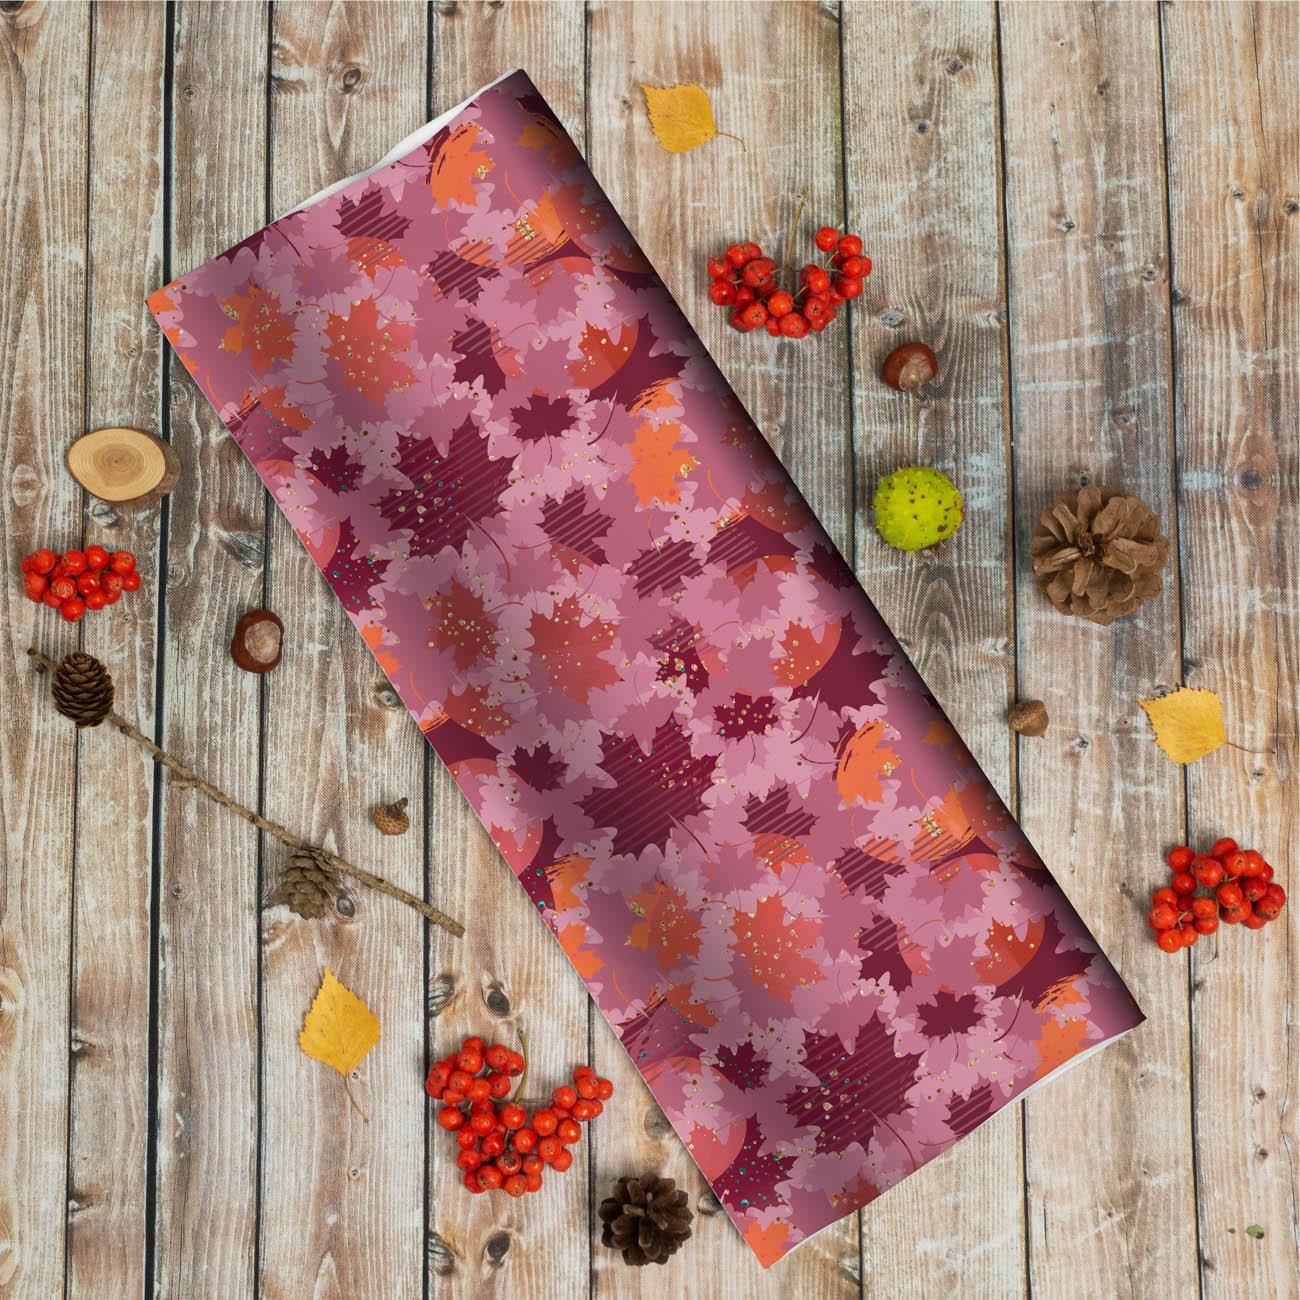 PINK LEAVES (GLITTER AUTUMN) - looped knit fabric